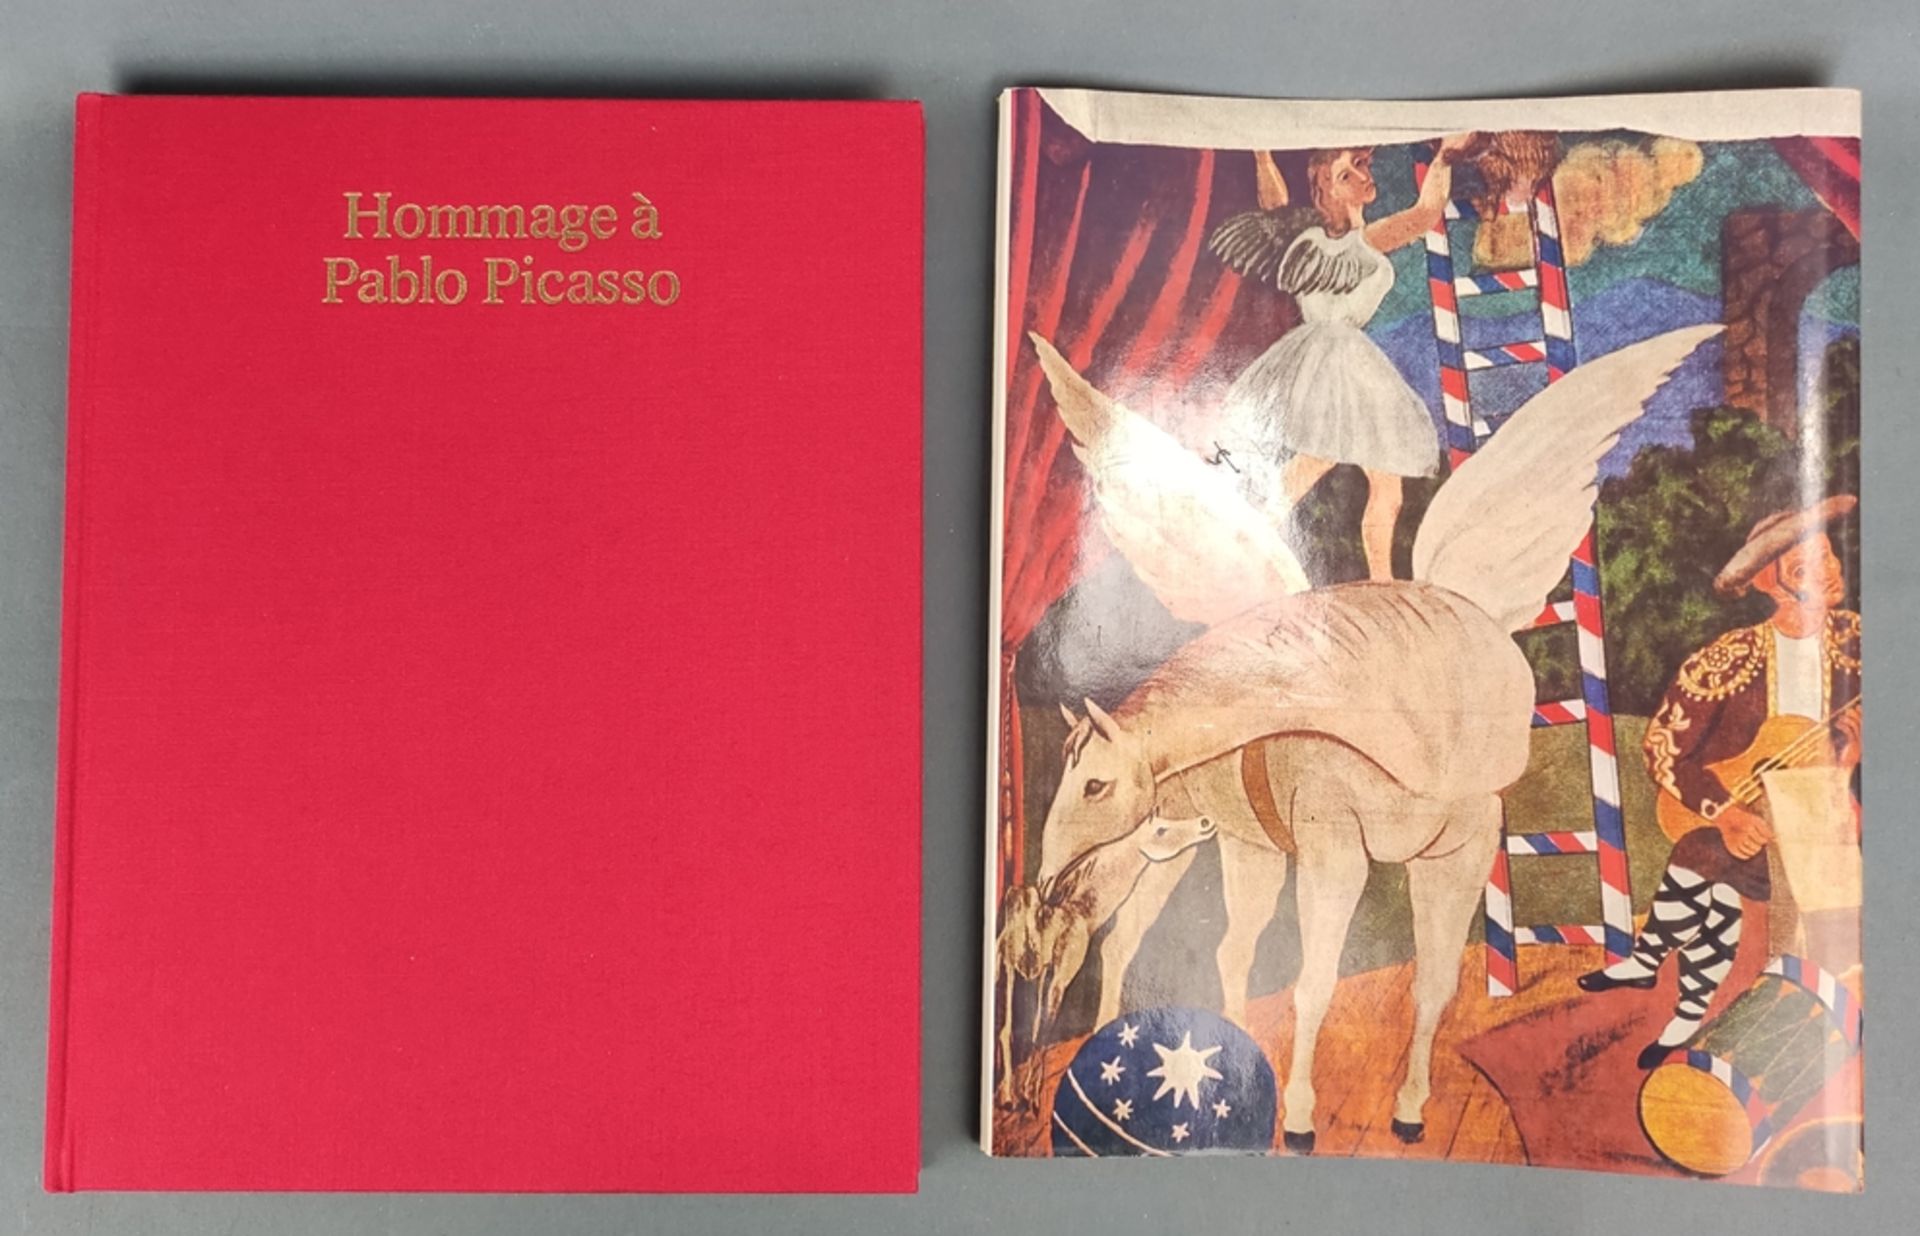 San Lazzaro, G. di (ed. ) "Hommage á Pablo Picasso", 136 pages, Ebeling, Wiesbaden 1976, with origi - Image 7 of 8